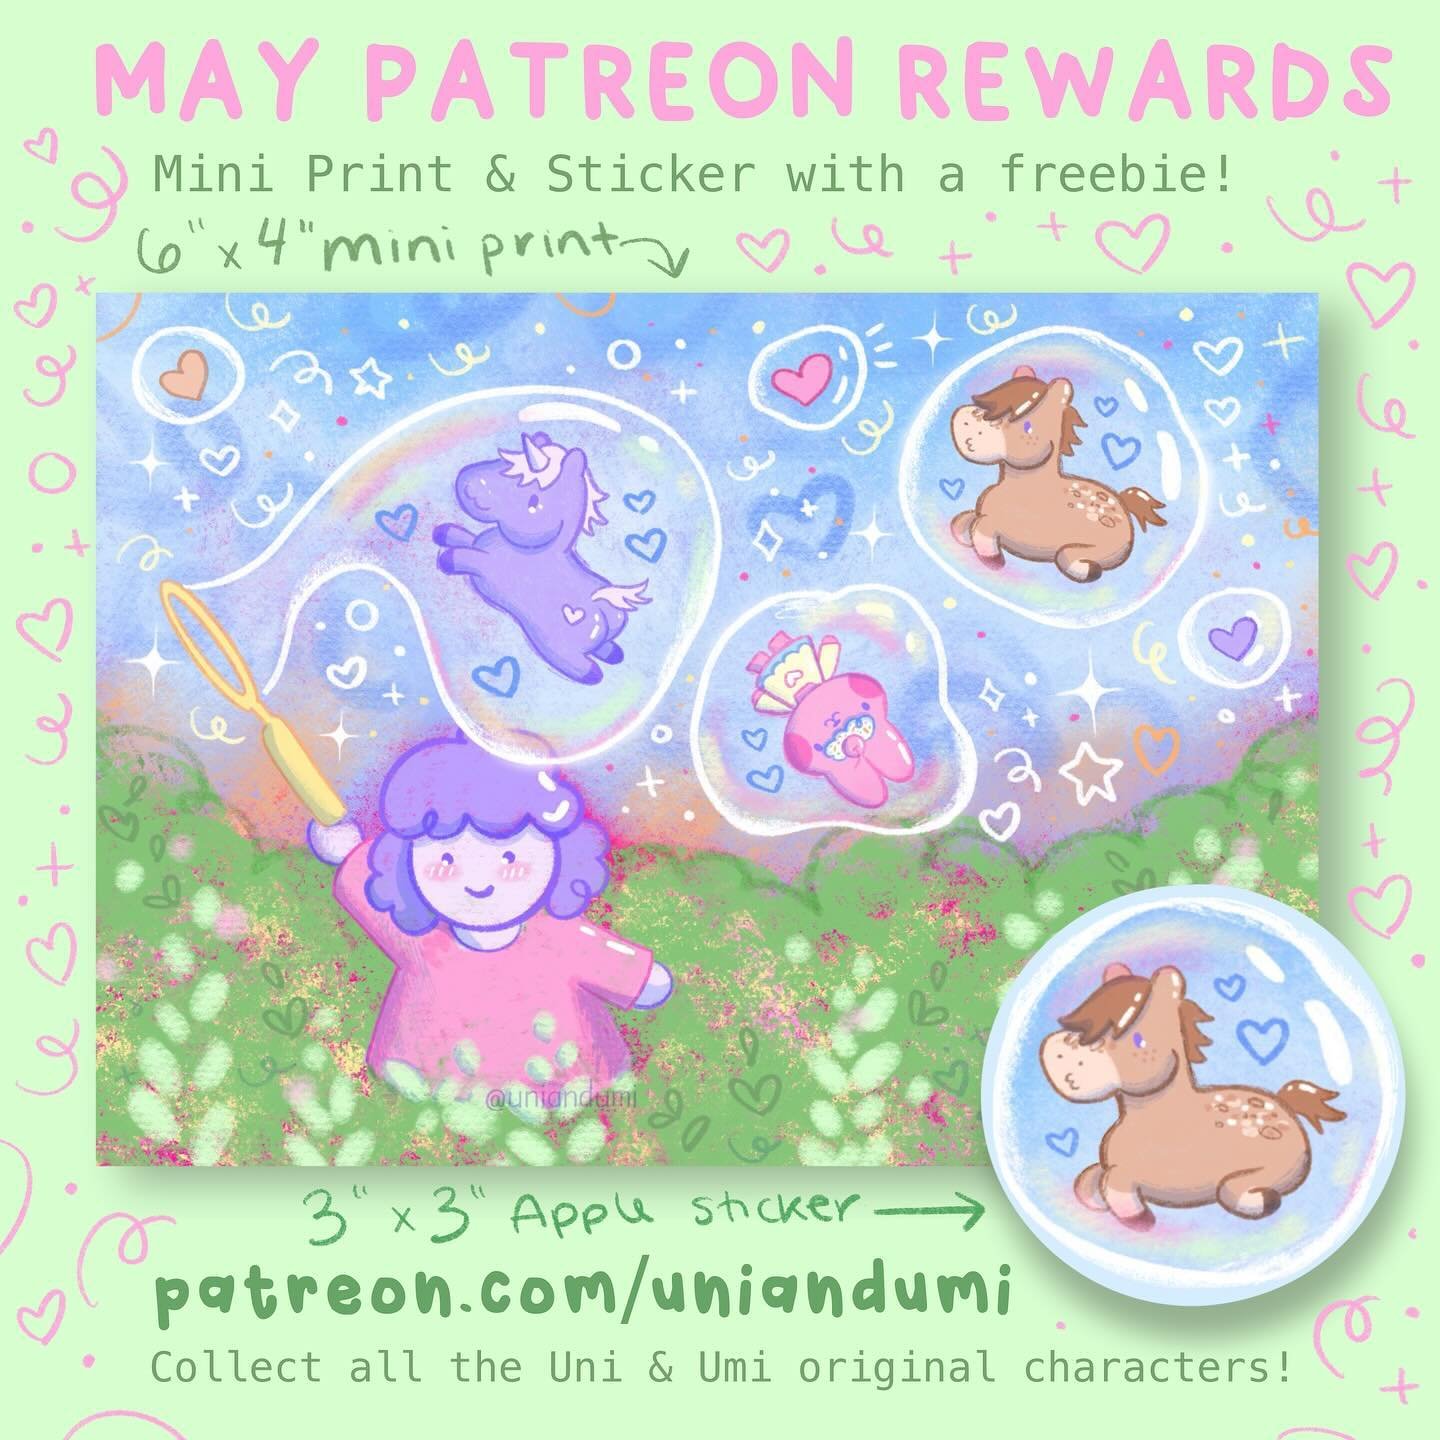 🫧May Patre⭐️n rewards are here!! Swipe to see the details!🫧💖 Umi is catching Uni, Bubblegum (Bubs), and Apple in bubbles hehe! This was such a nice piece to draw and helped me get through this TERRIBLE week oh my god. The horrors persist but so do